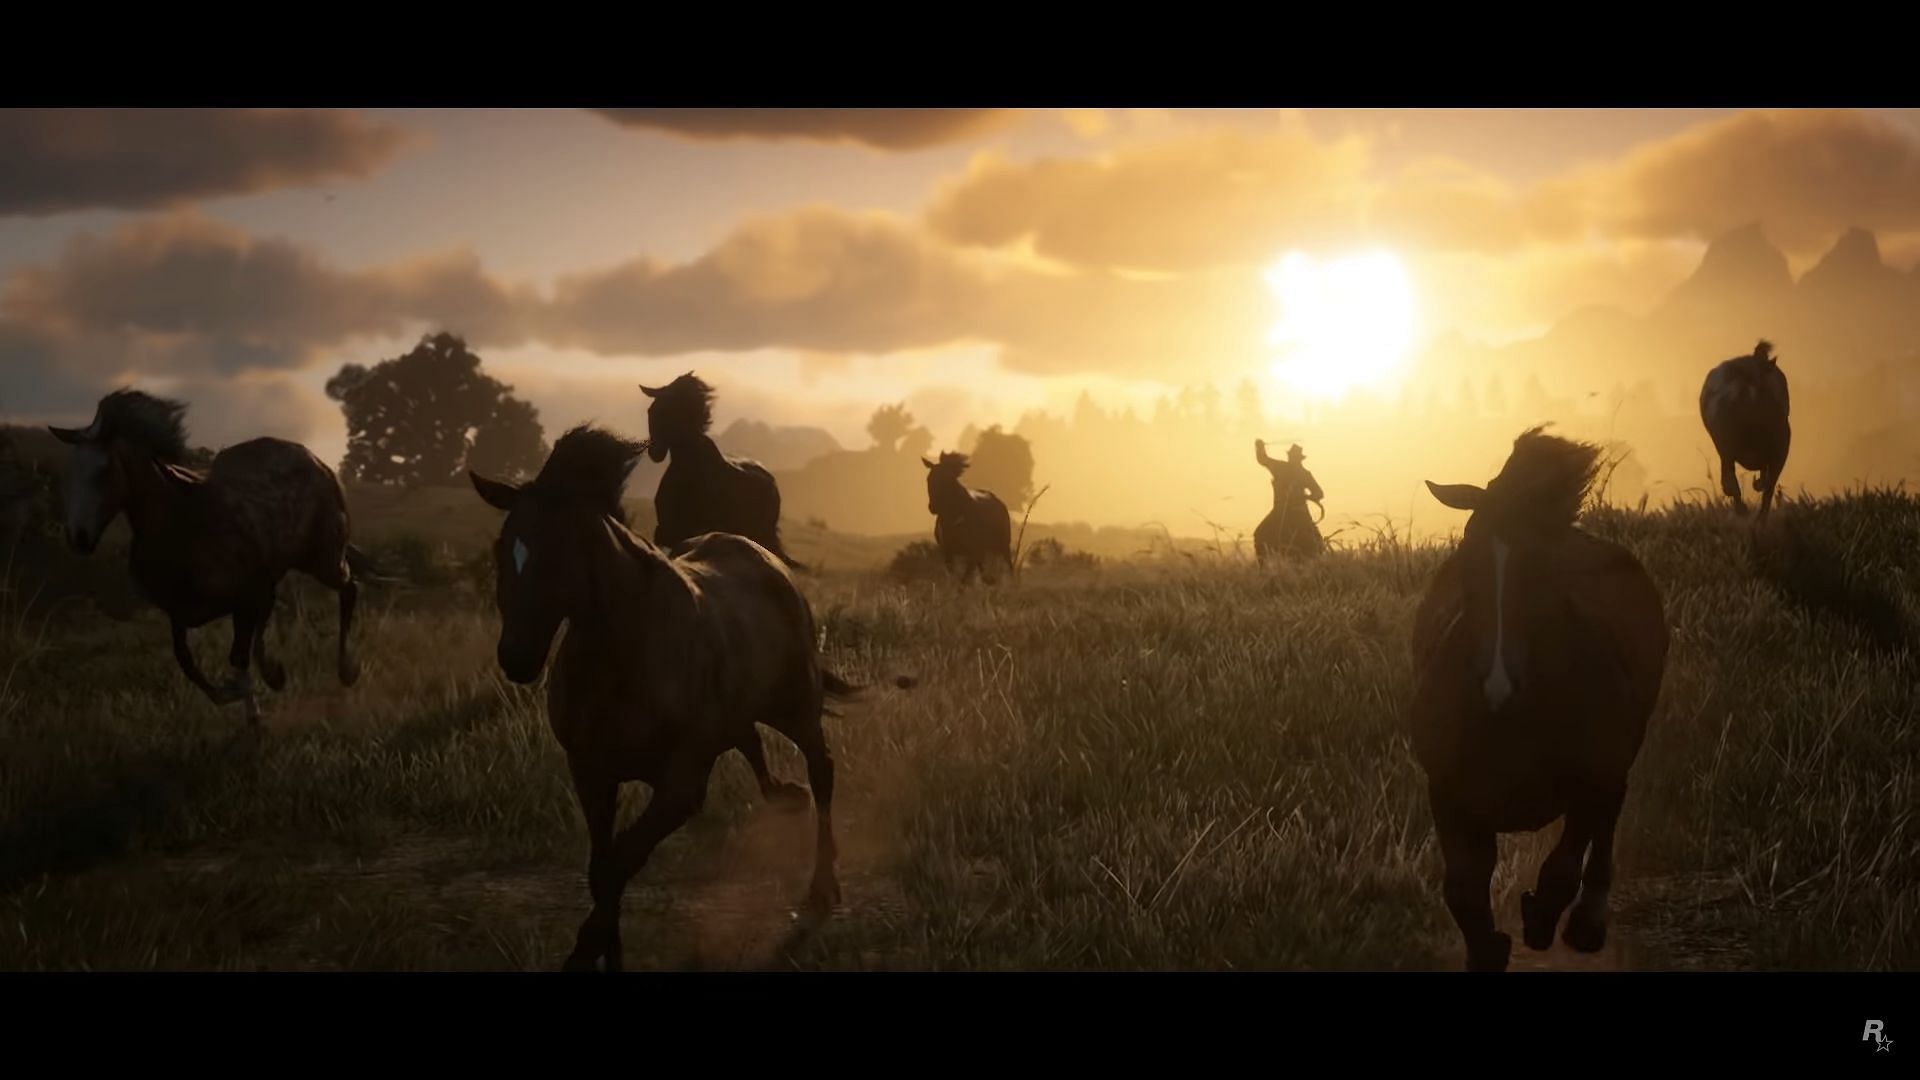 On the chase (Image via Red Dead Redemption 2)